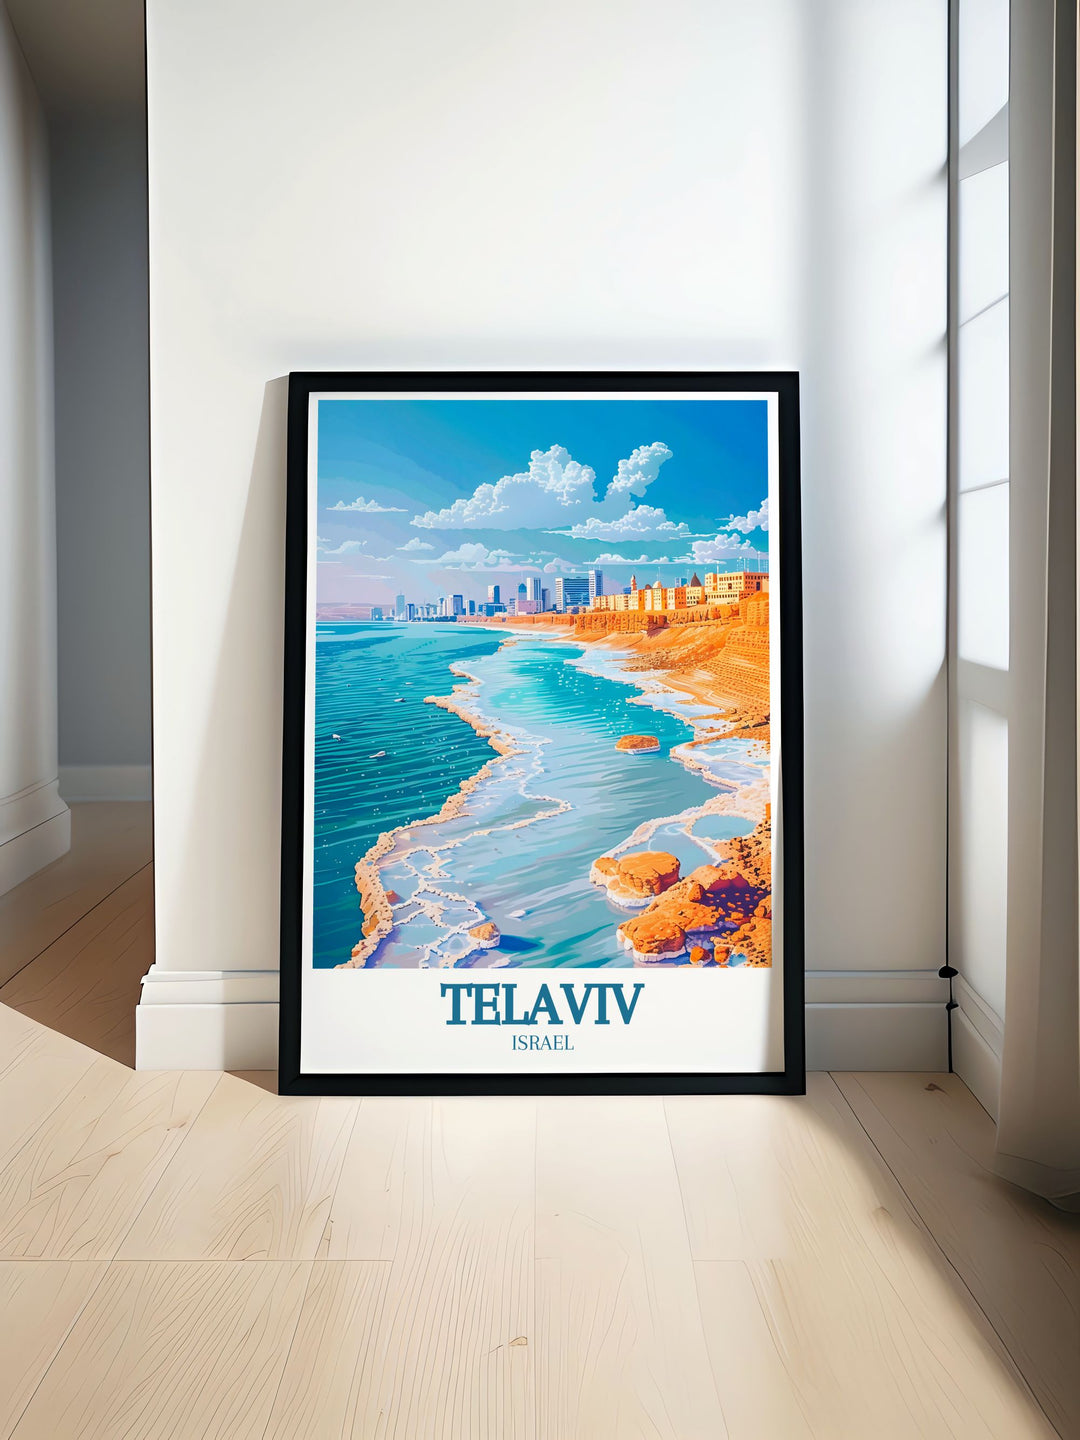 Celebrating Tel Avivs vibrant street life and modern architecture, this travel poster brings the dynamic spirit of the city into your living space. Ideal for those who love lively atmospheres and rich cultural heritage.